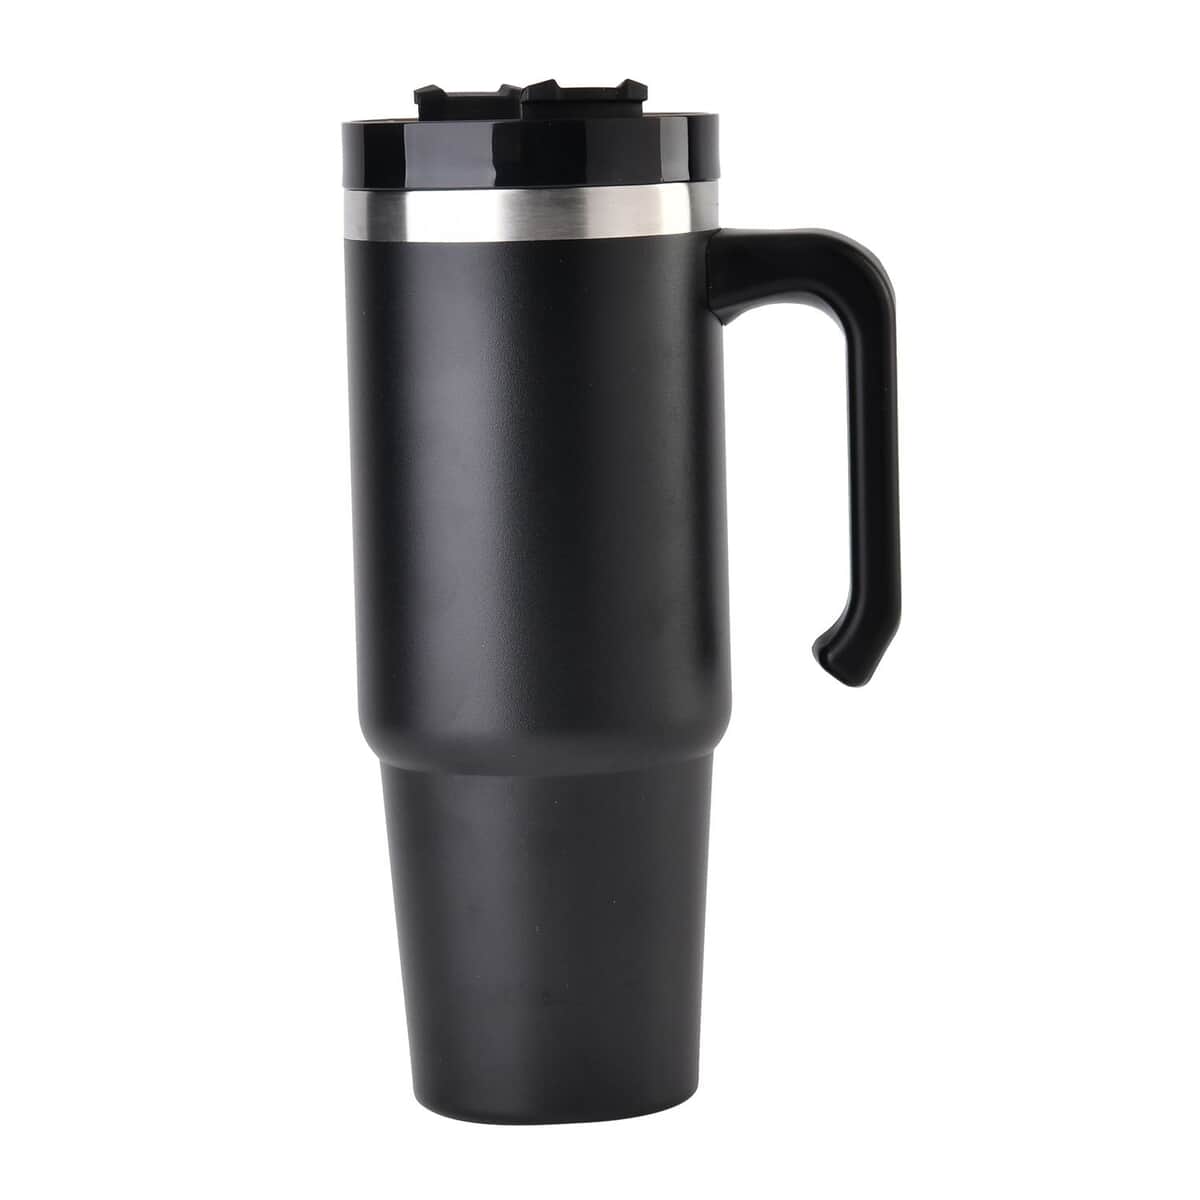 30oz Stainless Steel Cup with Straw - Black, Double Walled Leak Proof Reusable Quencher Tumbler For Travel image number 4